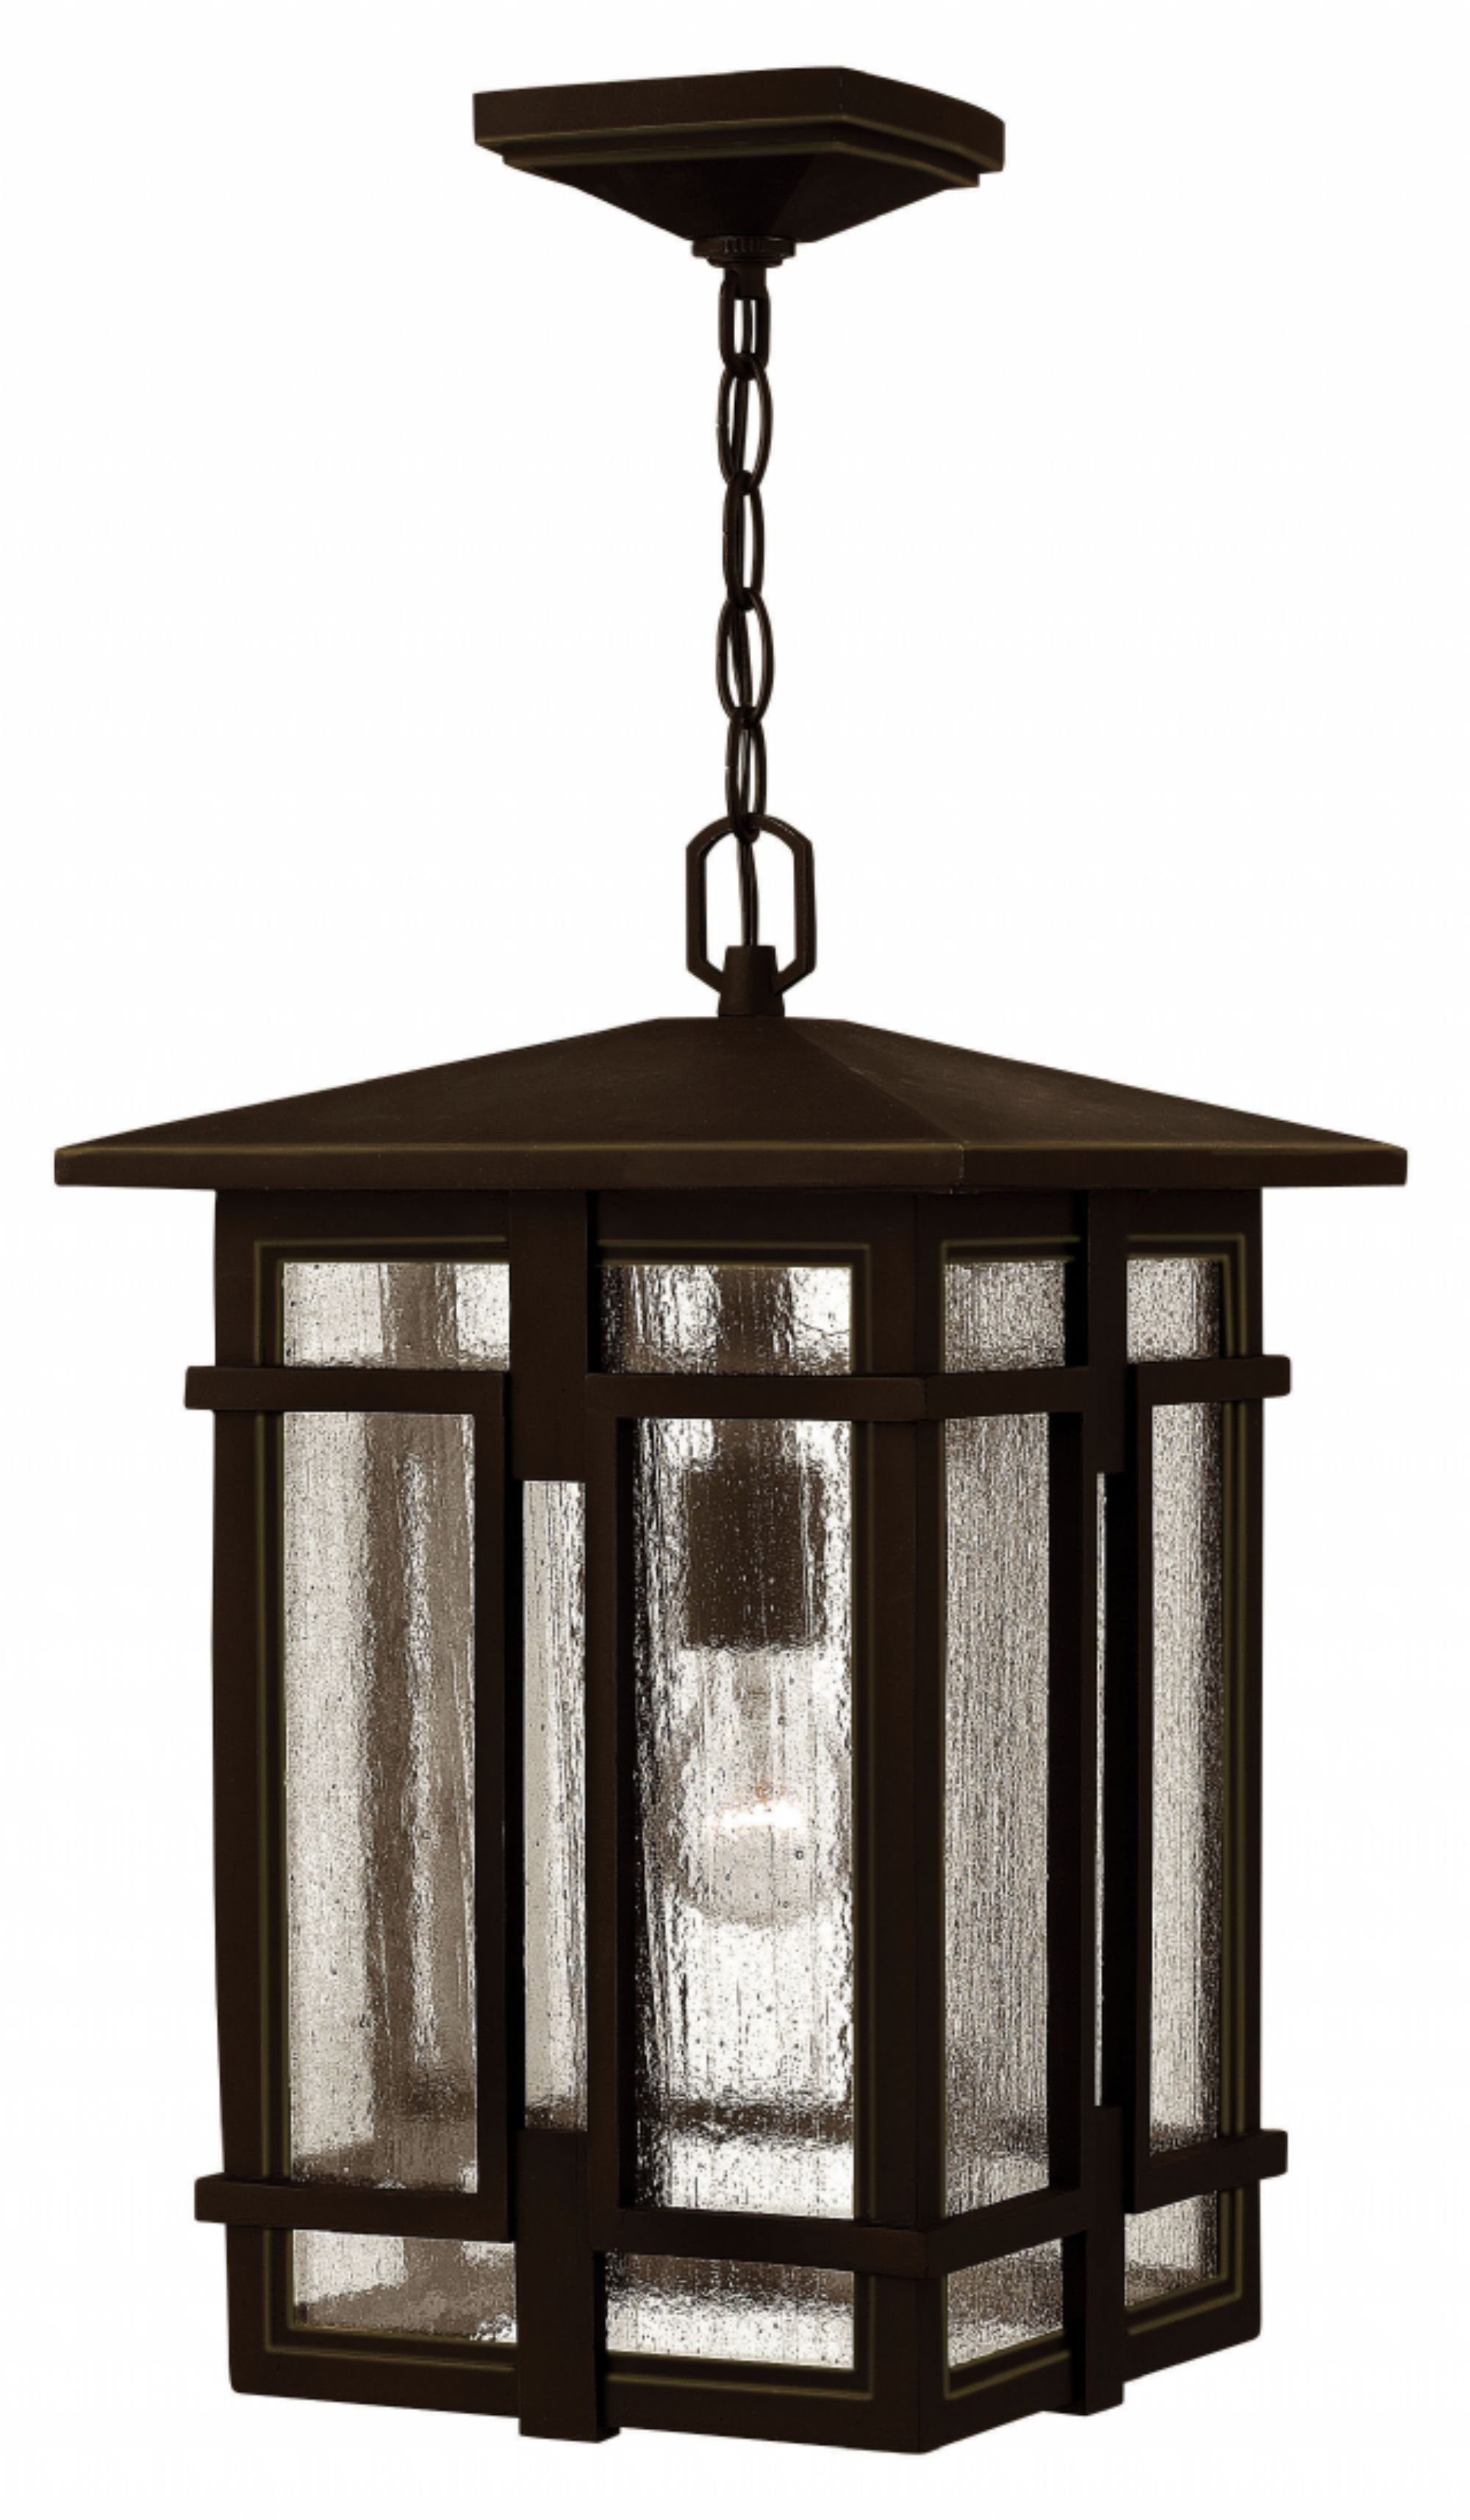 How Do You Light A Craftsman Style Home? | Craftsman Lighting Within Hinkley Lighting For Home Garden (View 10 of 15)